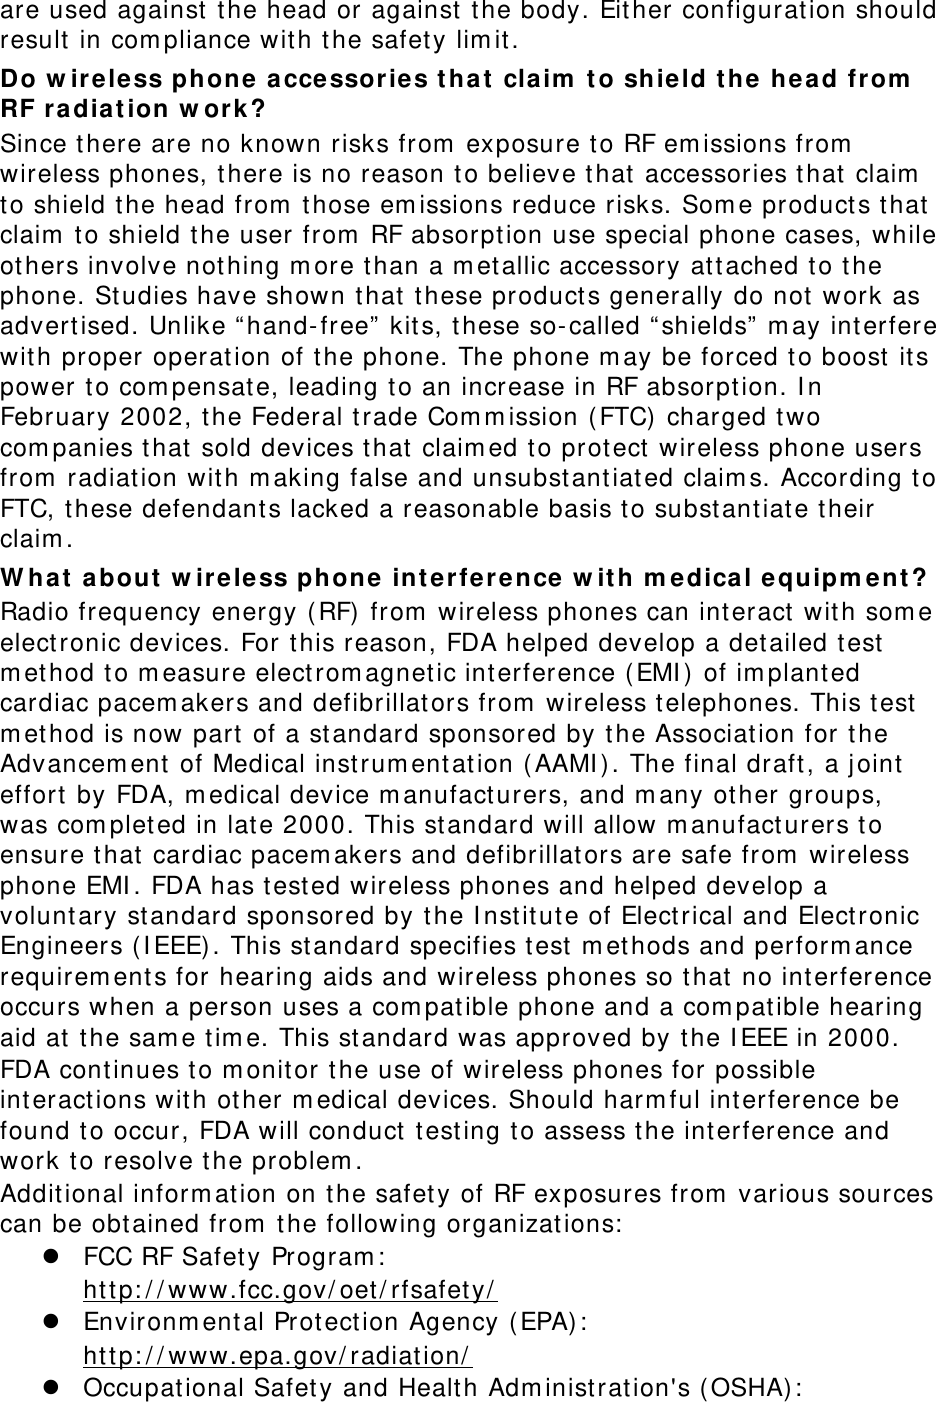 are used against t he head or against  t he body. Eit her configuration should result in com pliance wit h t he safet y lim it . Do w ir e less phone acce ssor ie s t ha t  cla im  t o shield t he he a d from  RF r a diat ion w ork ? Since t here are no known risks from  exposure to RF em issions from  wireless phones, t here is no reason to believe t hat accessories t hat claim  to shield t he head from  those em issions reduce risks. Som e products t hat claim  t o shield the user from  RF absorption use special phone cases, while others involve nothing m ore t han a m et allic accessory at tached t o the phone. Studies have shown that  t hese products generally do not  work as advertised. Unlike “ hand- free” kits, t hese so- called “ shields”  m ay interfere with proper operation of the phone. The phone m ay be forced t o boost  its power t o com pensat e, leading t o an increase in RF absorpt ion. I n February 2002, t he Federal t rade Com m ission ( FTC) charged t wo com panies t hat sold devices t hat claim ed t o protect  wireless phone users from  radiat ion with m aking false and unsubst ant iated claim s. According t o FTC, these defendant s lacked a reasonable basis t o substant iate their claim . W ha t  a bout  w ir e le ss phone int erference  w it h m edica l equipm ent ? Radio frequency energy ( RF)  from  wireless phones can interact  wit h som e elect ronic devices. For t his reason, FDA helped develop a detailed t est  m et hod to m easure elect rom agnetic interference ( EMI )  of im plant ed cardiac pacem akers and defibrillat ors from  wireless t elephones. This test  m et hod is now part  of a st andard sponsored by t he Association for the Advancem ent  of Medical inst rum entation ( AAMI ) . The final draft , a j oint  effort  by FDA, m edical device m anufact urers, and m any other groups, was com plet ed in lat e 2000. This standard will allow m anufact urers t o ensure that  cardiac pacem akers and defibrillators are safe from  wireless phone EMI . FDA has test ed wireless phones and helped develop a volunt ary standard sponsored by t he I nstitute of Elect rical and Elect ronic Engineers (I EEE). This standard specifies t est m et hods and perform ance requirem ent s for hearing aids and wireless phones so t hat no int erference occurs when a person uses a com patible phone and a com pat ible hearing aid at  t he sam e t im e. This standard was approved by t he I EEE in 2000. FDA cont inues to m onitor t he use of wireless phones for possible int eract ions wit h other m edical devices. Should harm ful int erference be found t o occur, FDA will conduct  t esting t o assess t he int erference and work t o resolve t he problem . Additional inform ation on t he safet y of RF exposures from  various sources can be obt ained from  t he following organizat ions:  z FCC RF Safety Program :   ht t p: / / www.fcc.gov/ oet / rfsafet y/  z Environm ent al Protection Agency ( EPA):   ht t p: / / www.epa.gov/ radiat ion/  z Occupational Safet y and Health Adm inistration&apos;s ( OSHA) :    